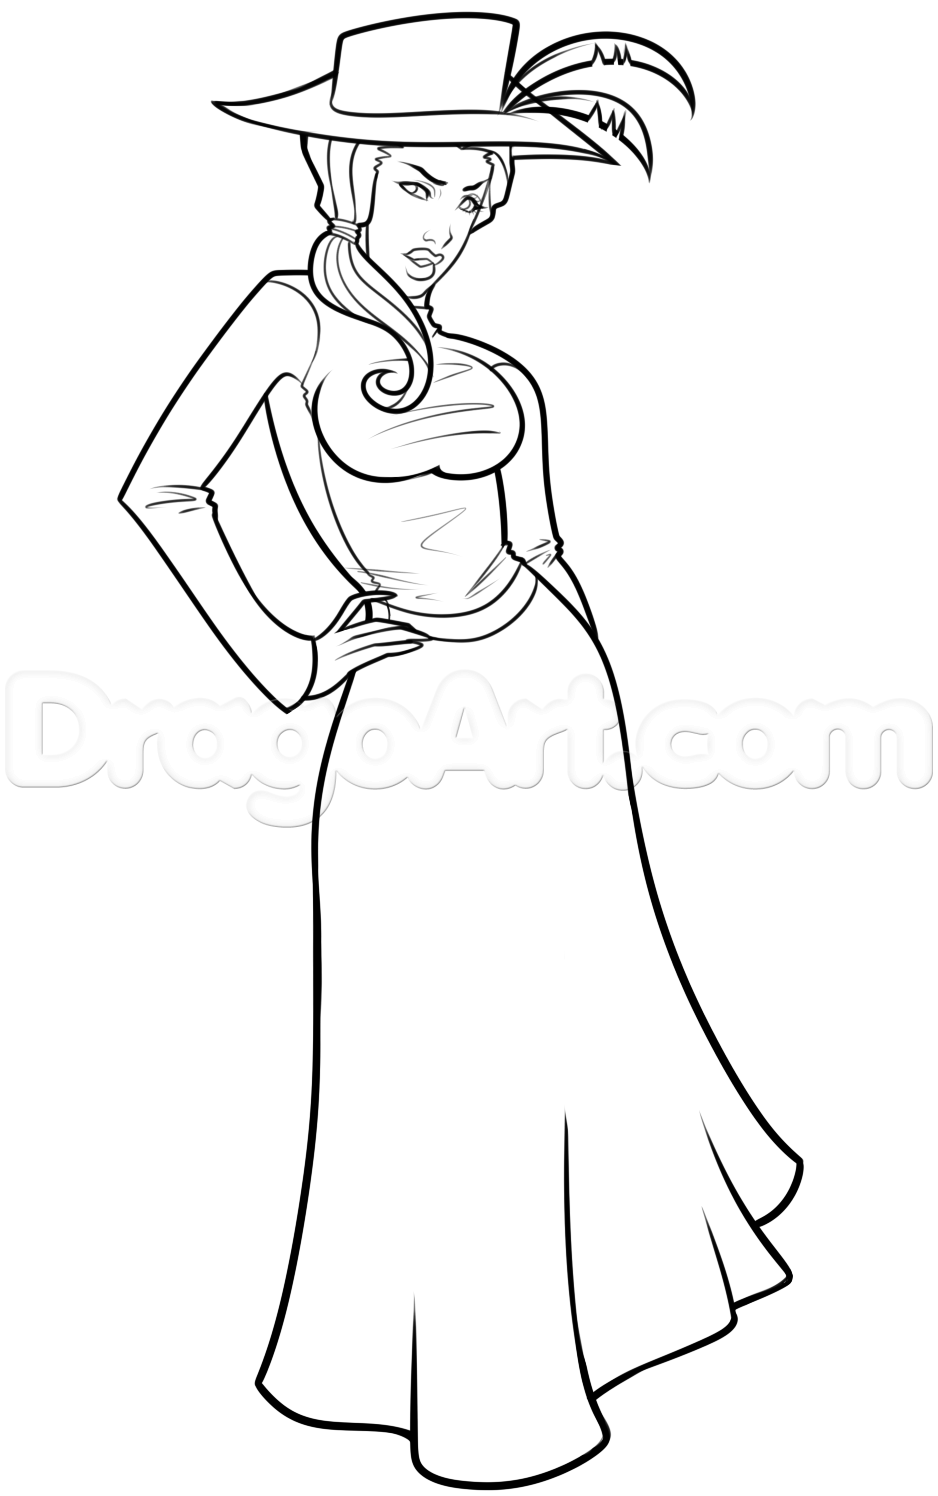 drawing-a-lady-step-by-step-step-9_1_000000185431_5